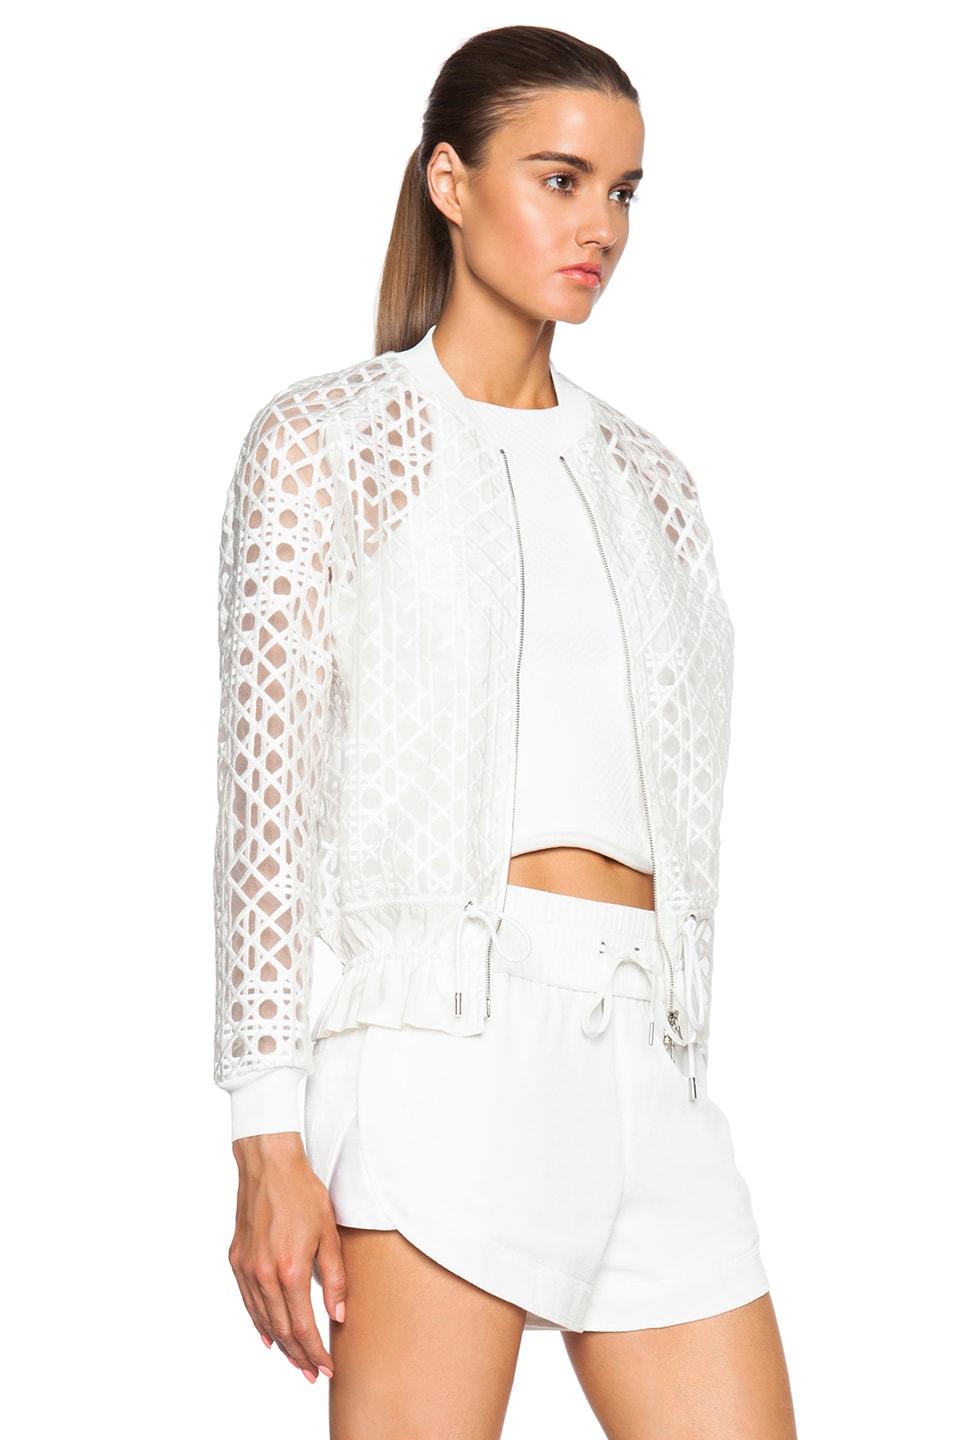 3.1 phillip lim Bomber with Drawstring Cinched Hem in Ivory & White | FWRD